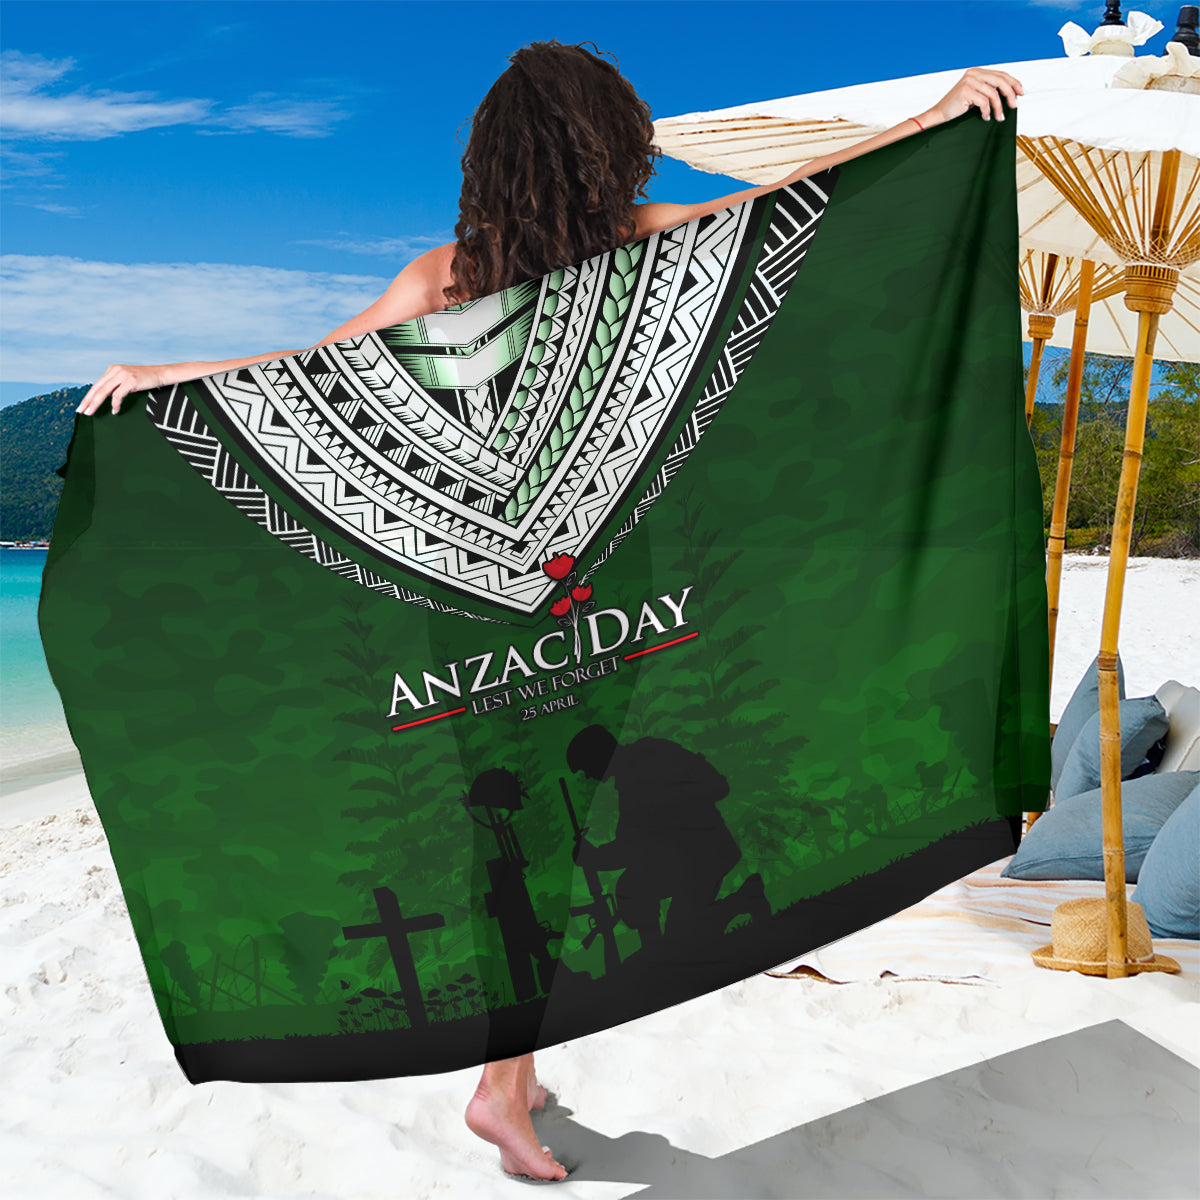 Norfolk Island ANZAC Day Sarong Soldier Lest We Forget Camouflage LT03 One Size 44 x 66 inches Green - Polynesian Pride